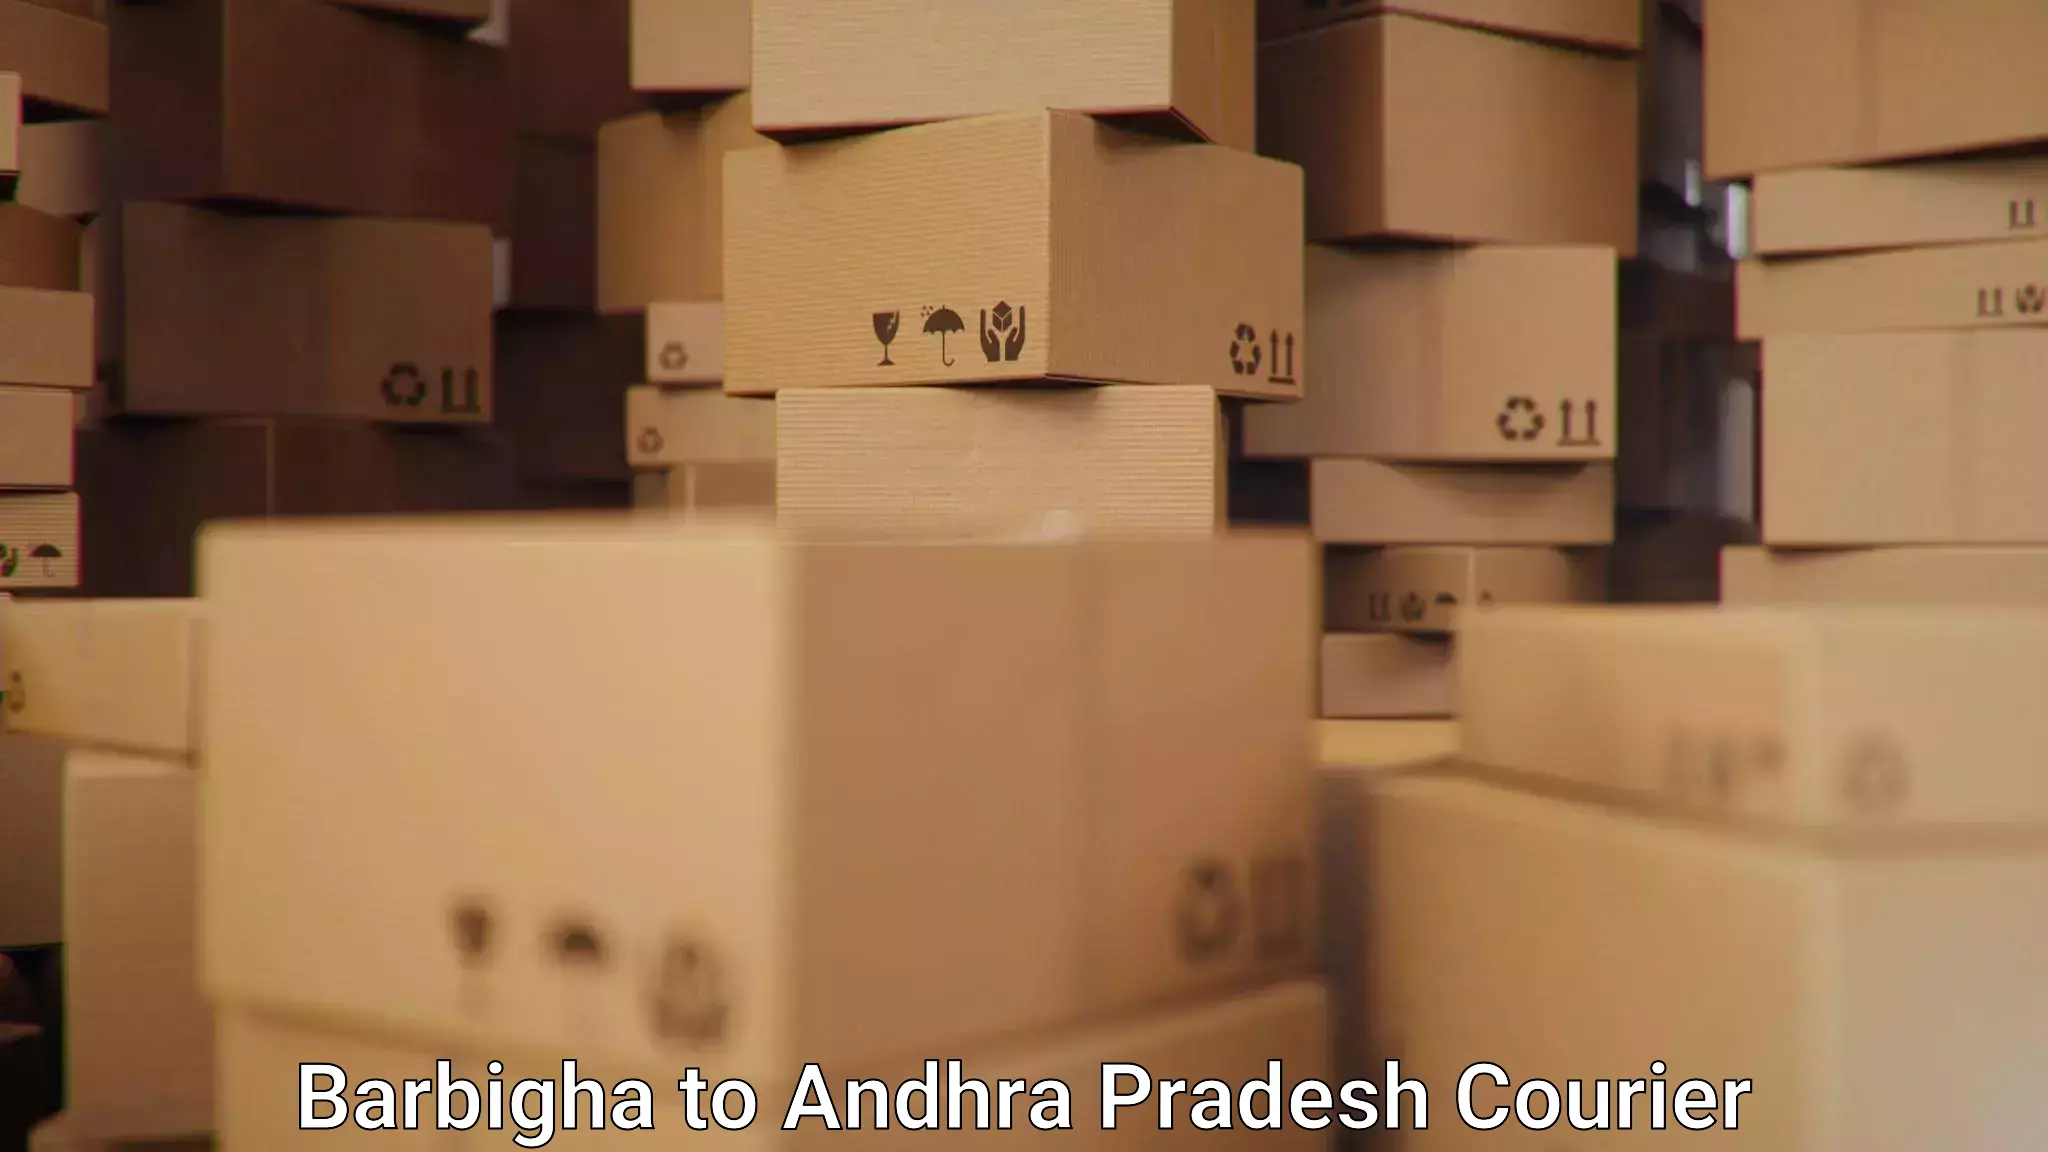 Reliable parcel services in Barbigha to Gudivada